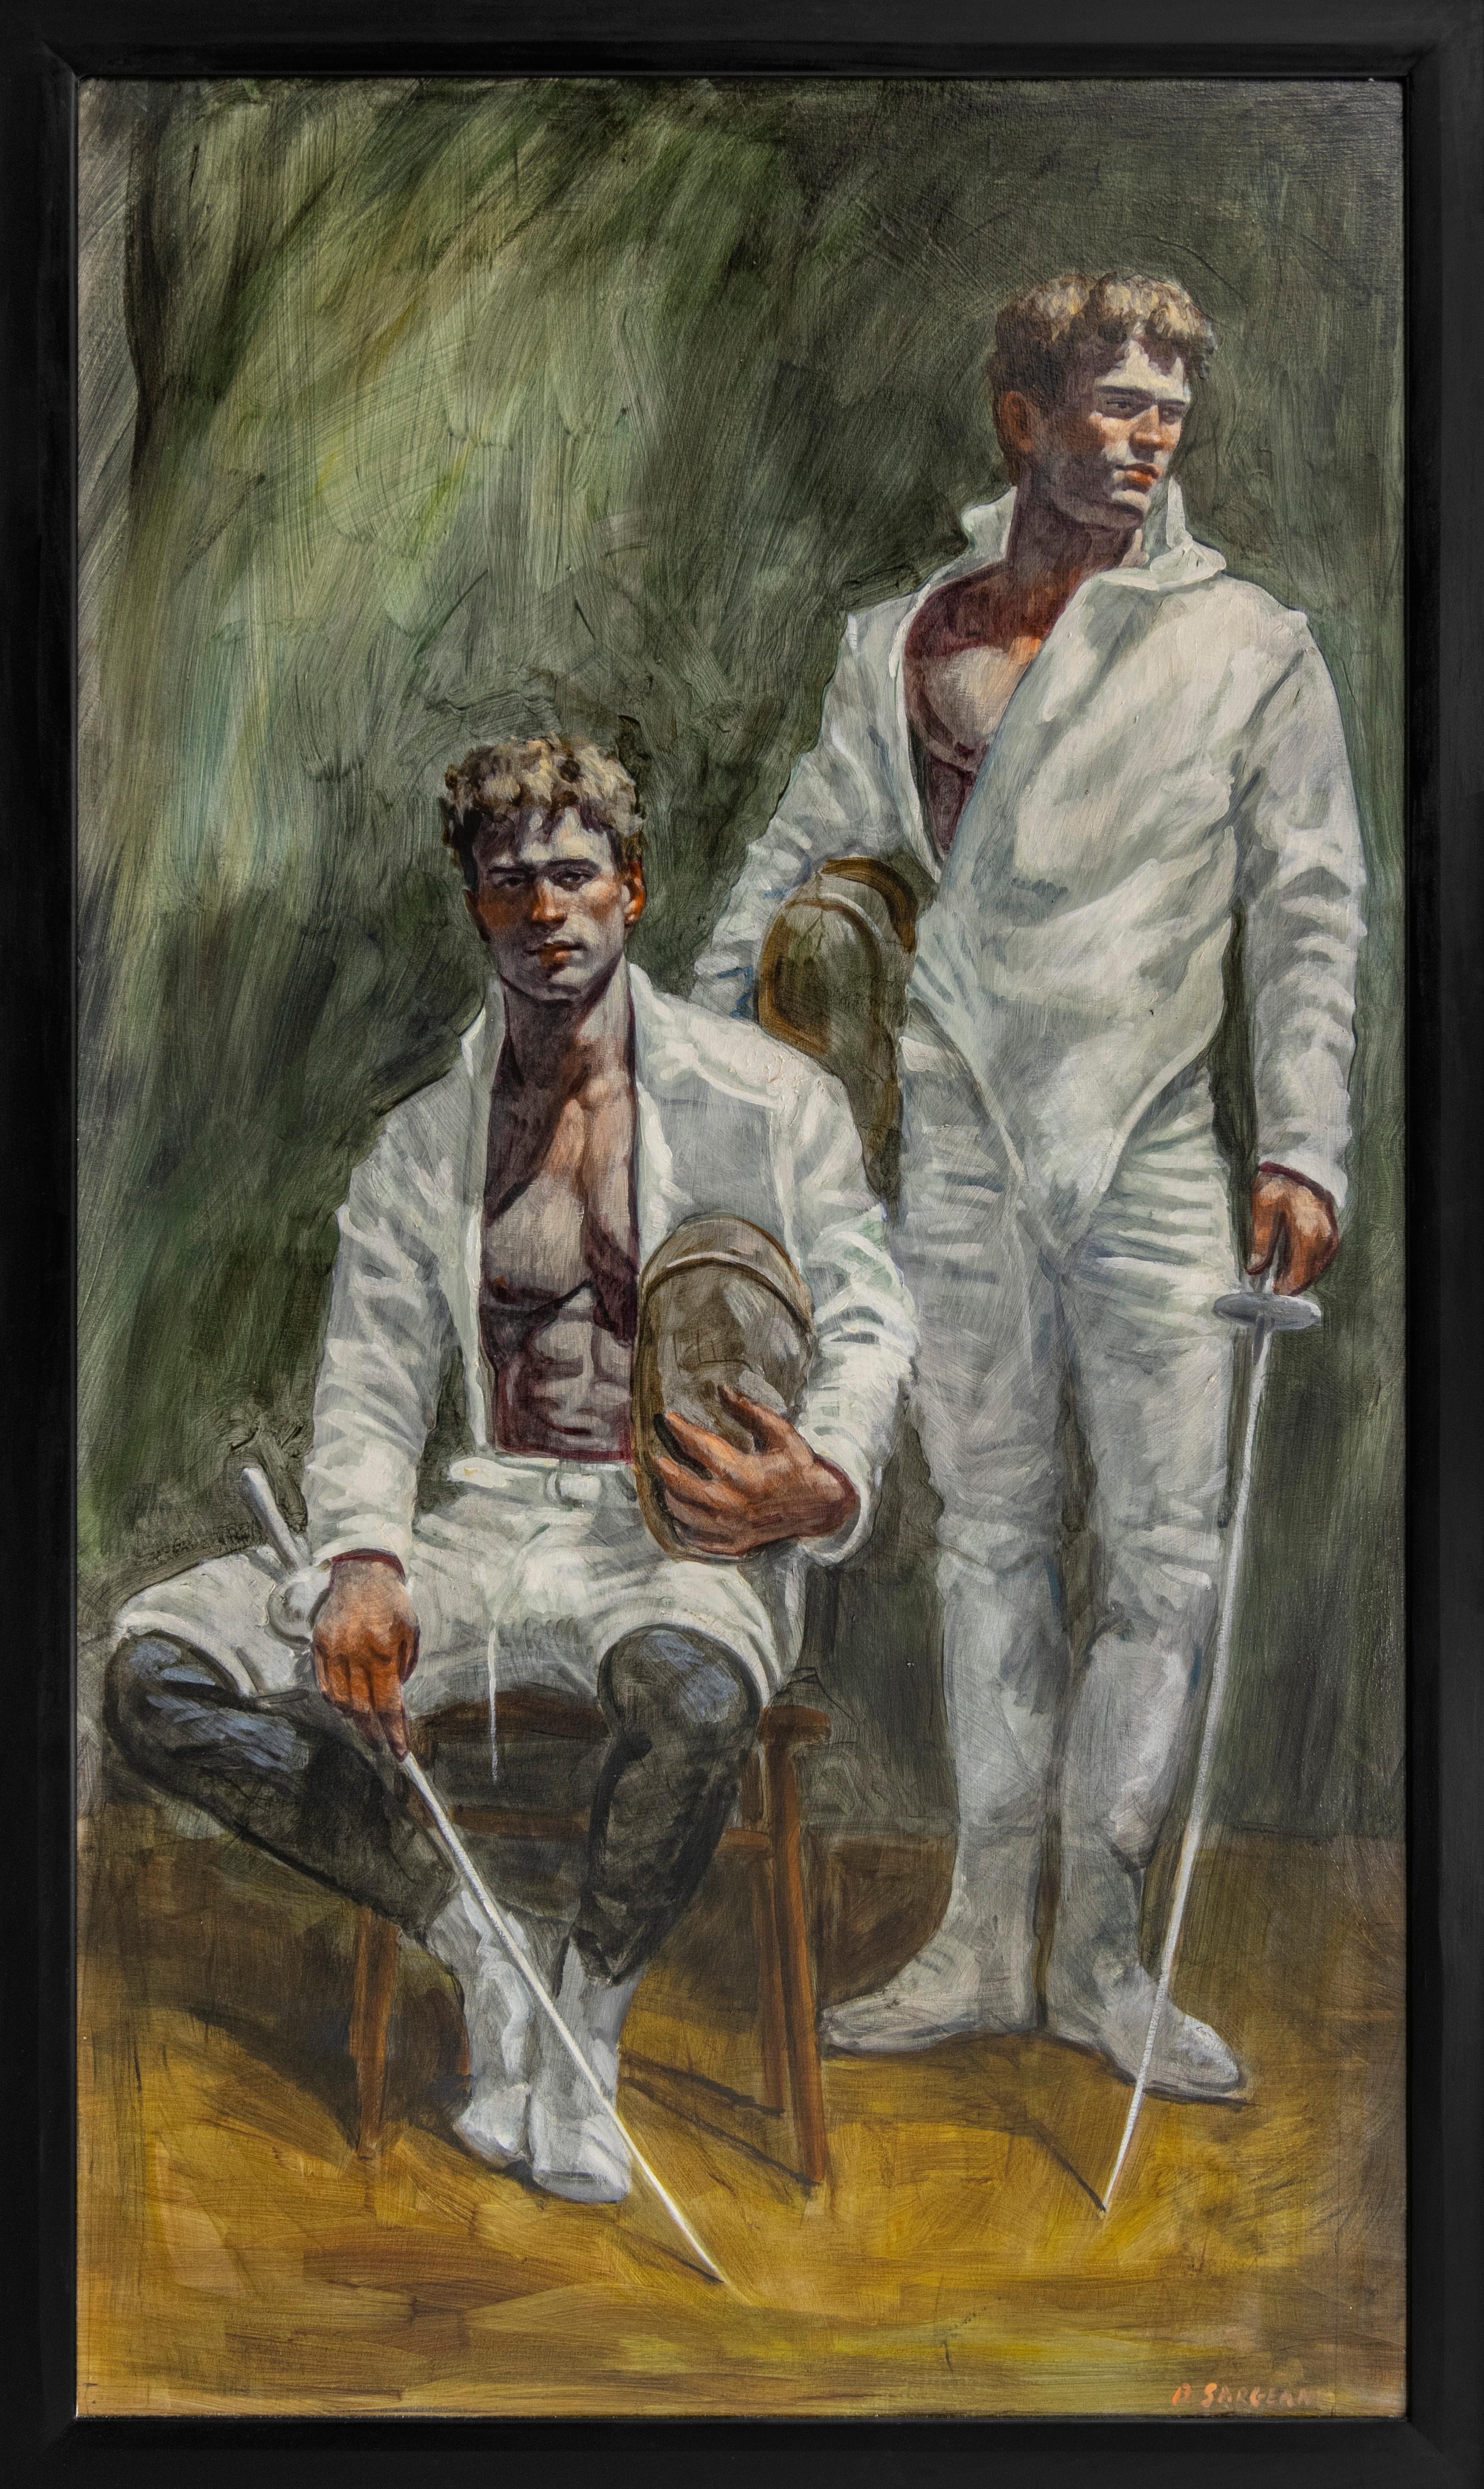 [Bruce Sargeant (1898-1938)] Portrait of Two Fencers - Painting by Mark Beard